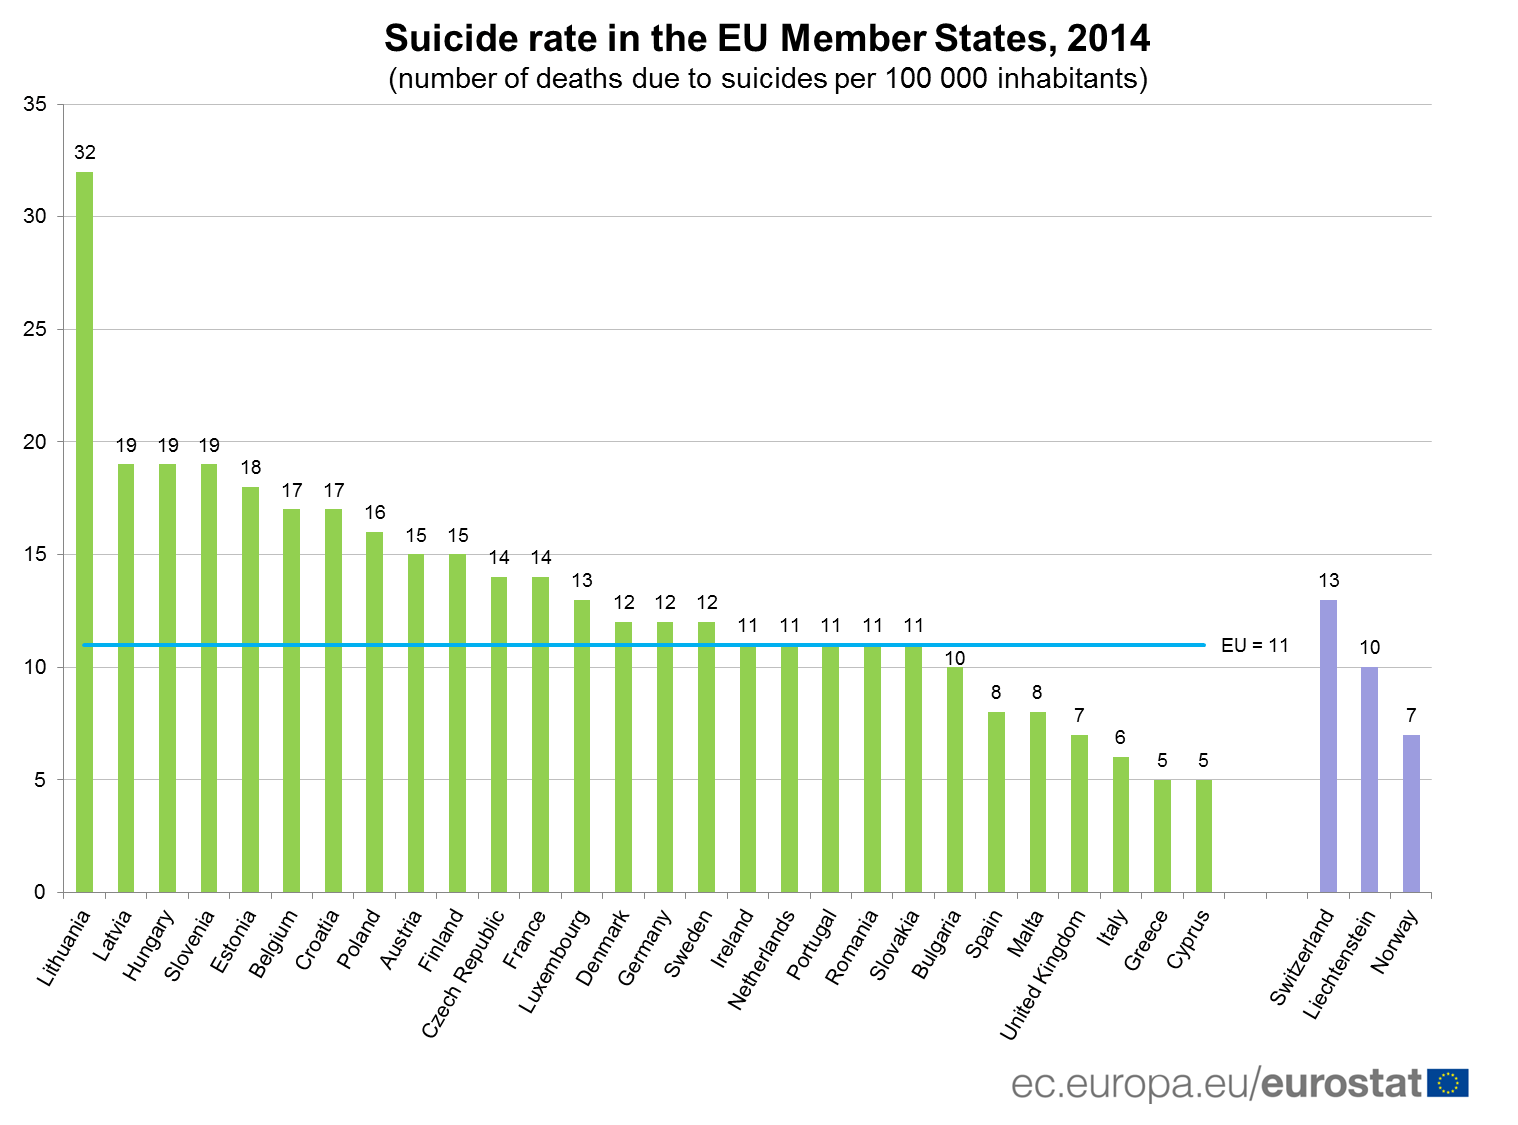 Denmark in the middle of the EU pack in suicides